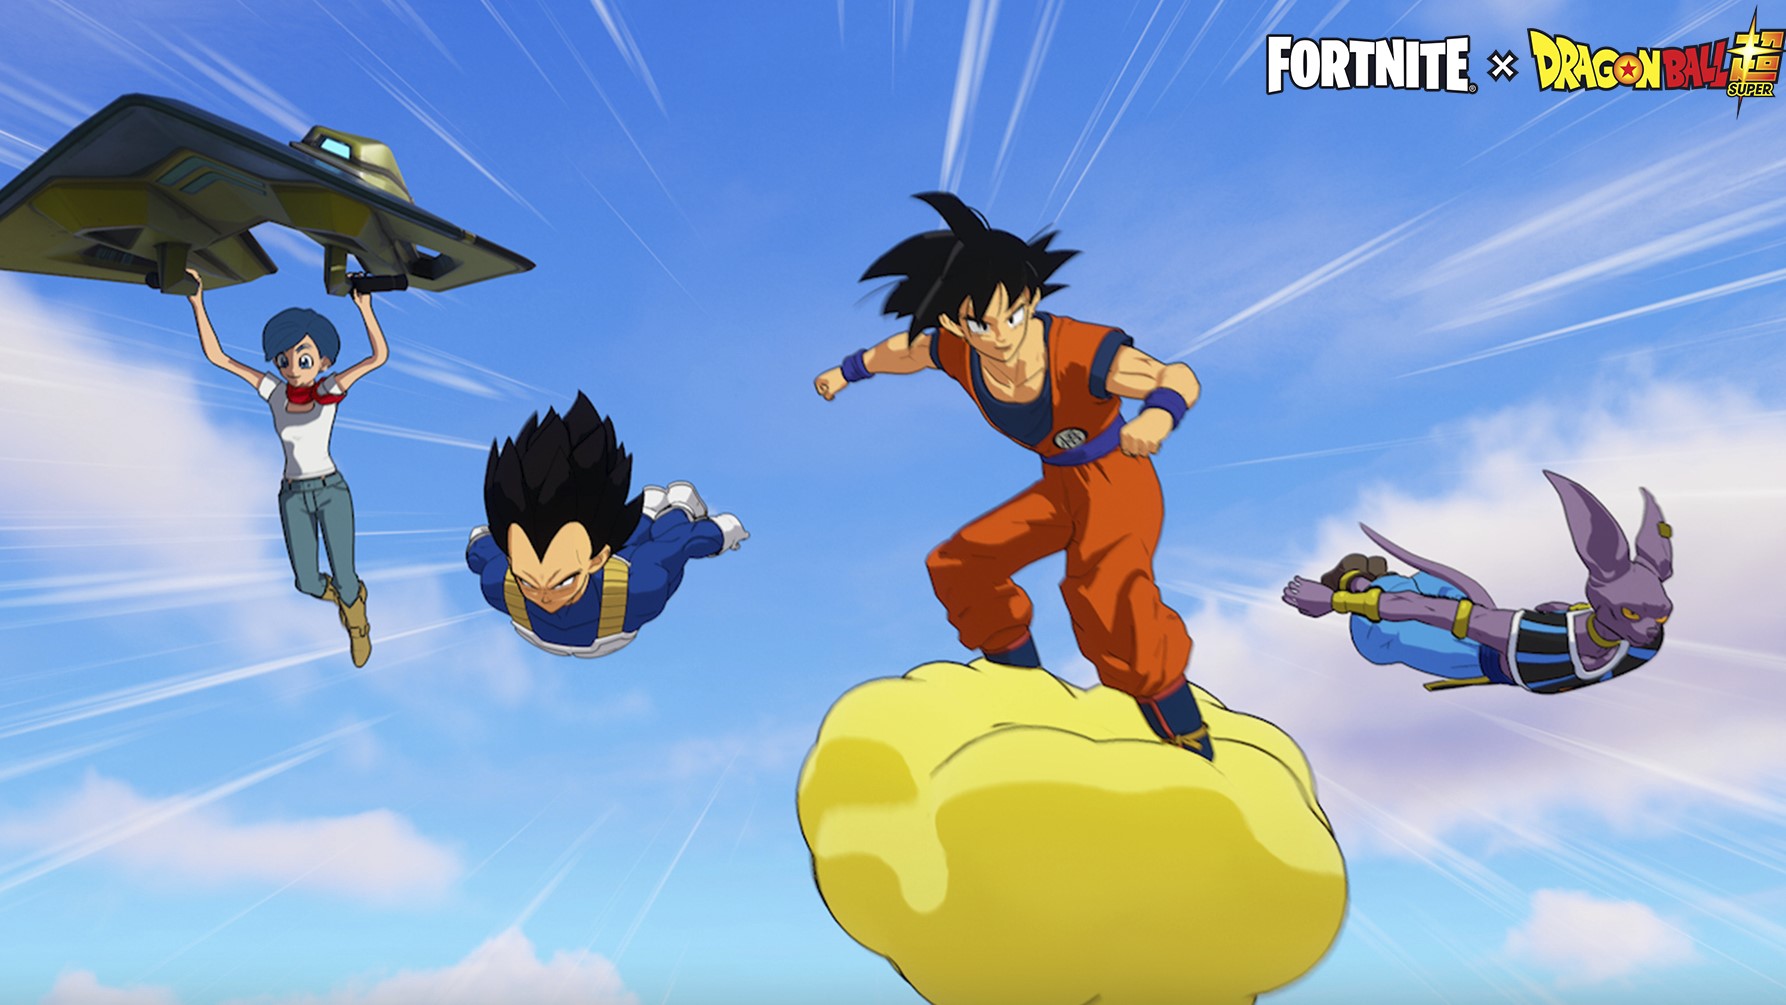 Fortnite x Dragon Ball: Tips and tricks to complete the missions – Globe Live Media